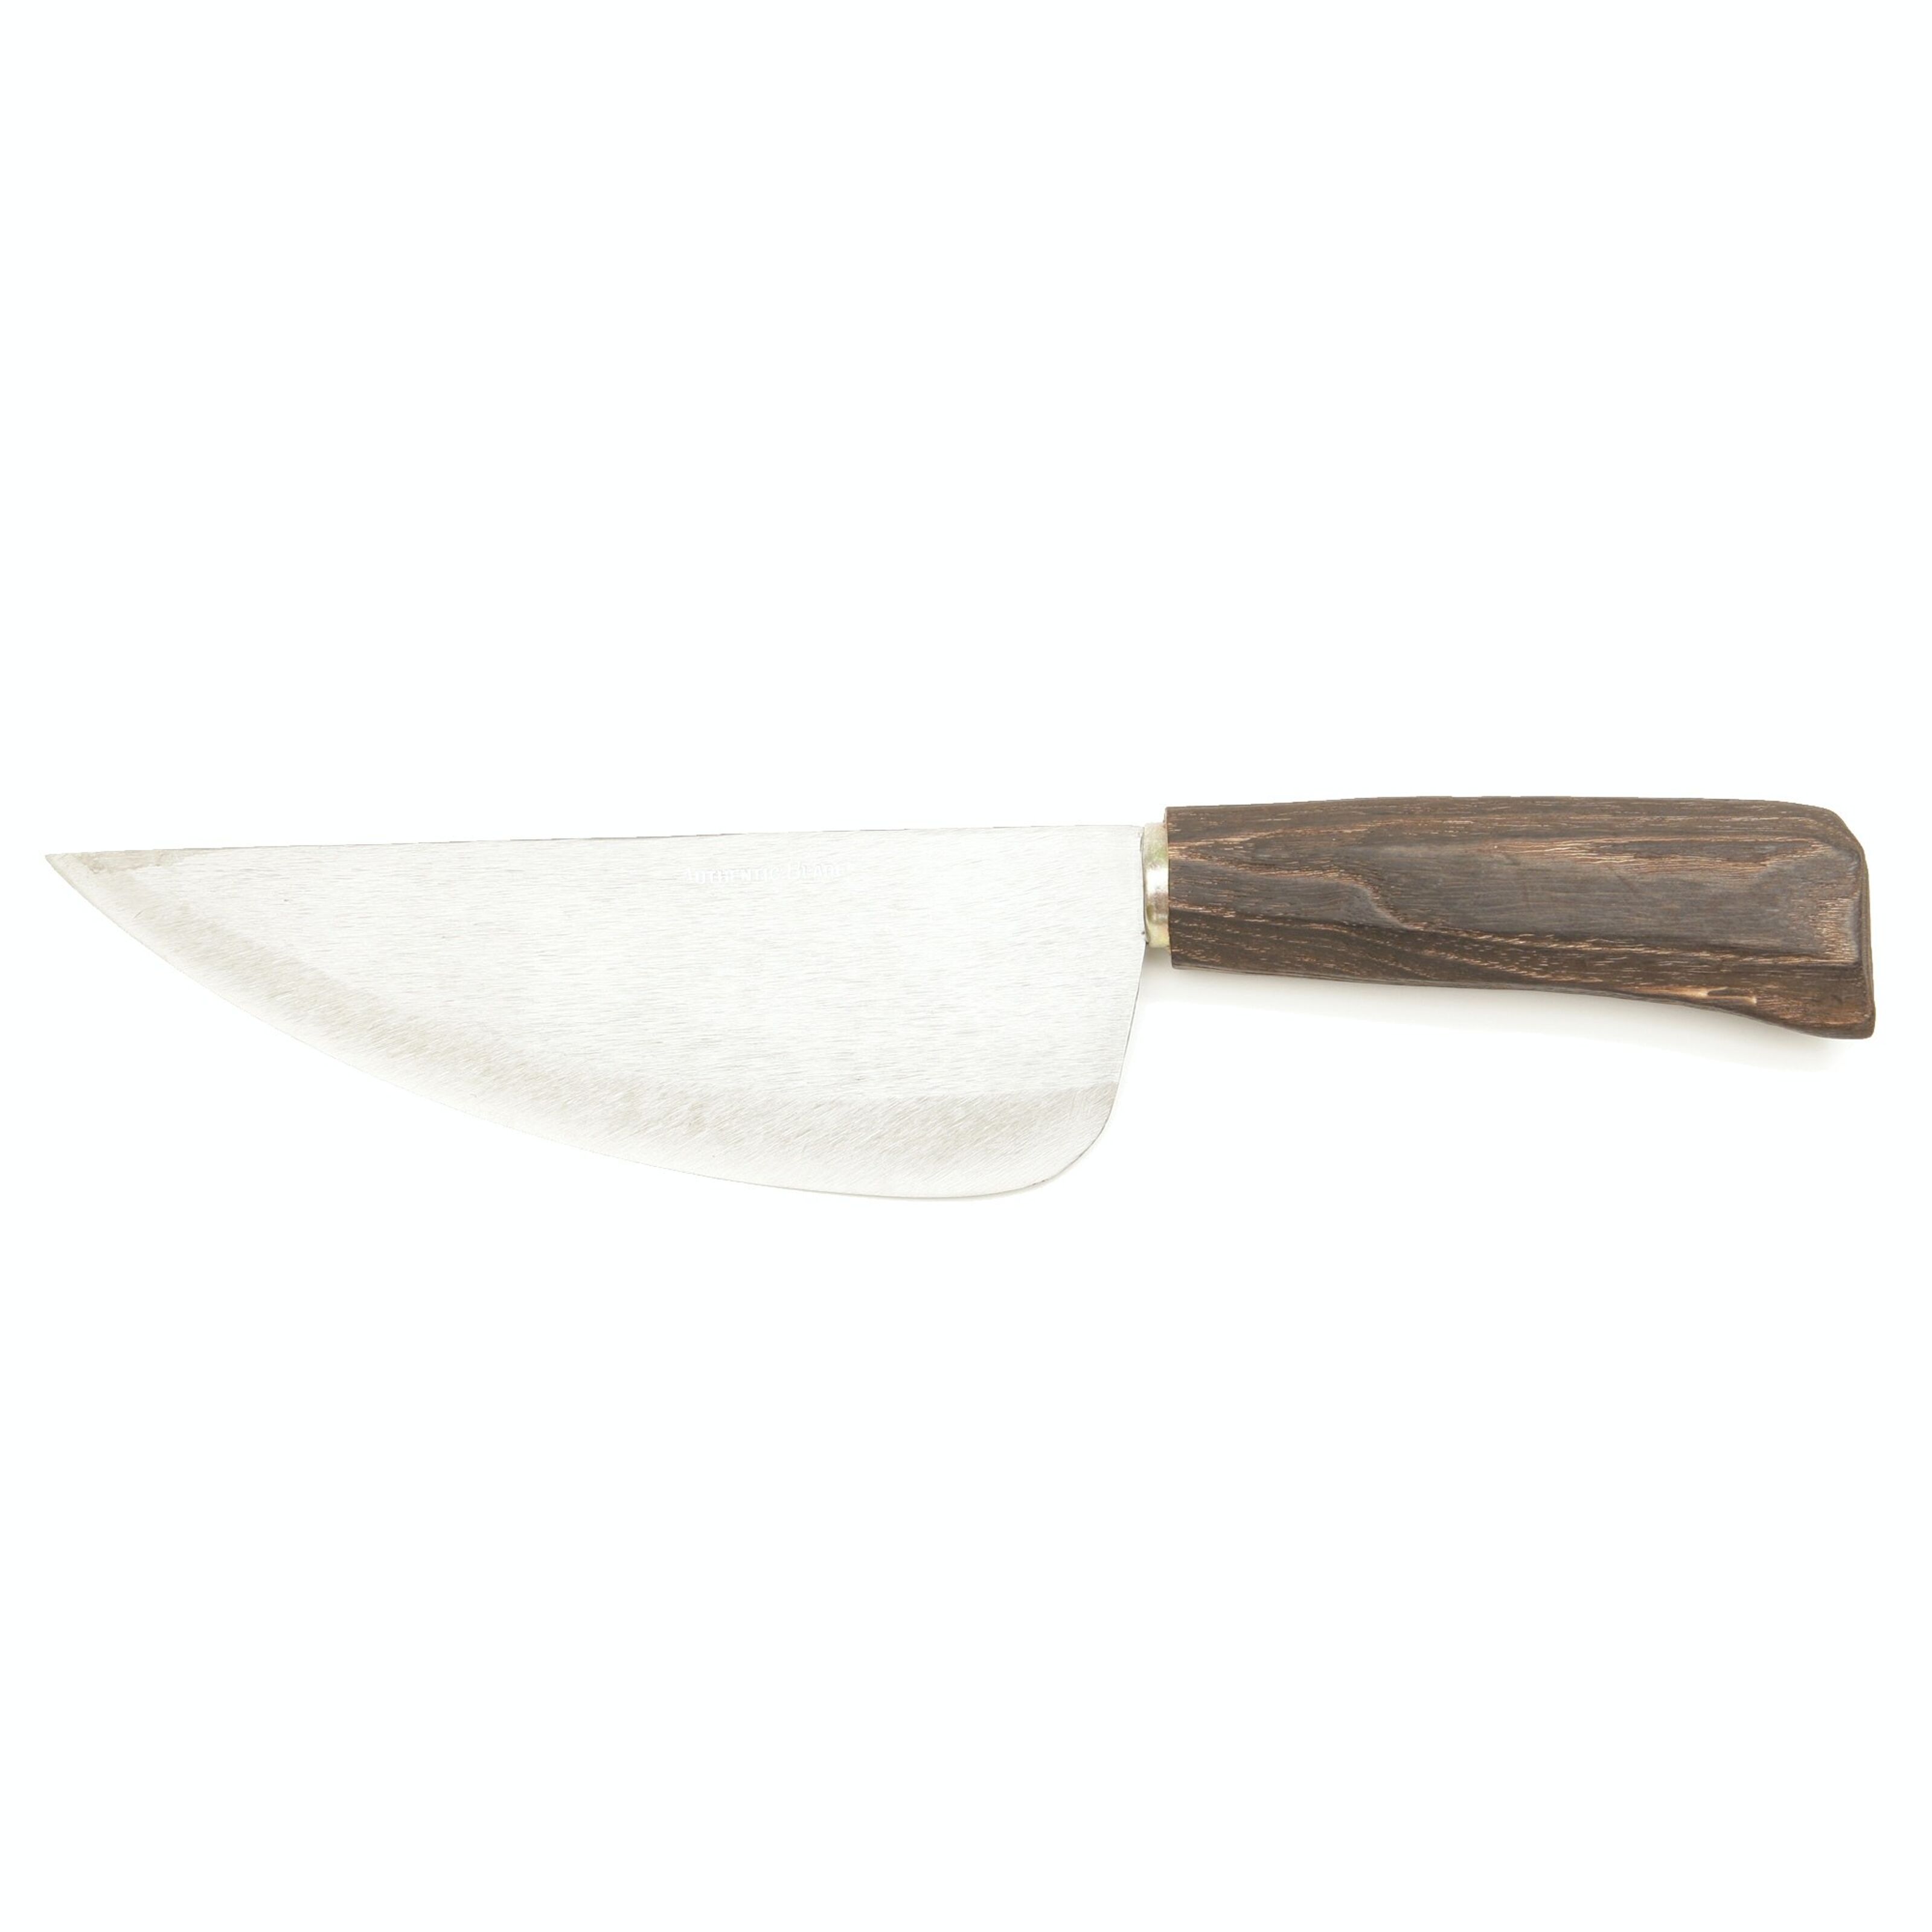 Large Kitchen Knife vay 20 Cm by Authentic Blades Chopping Knife 